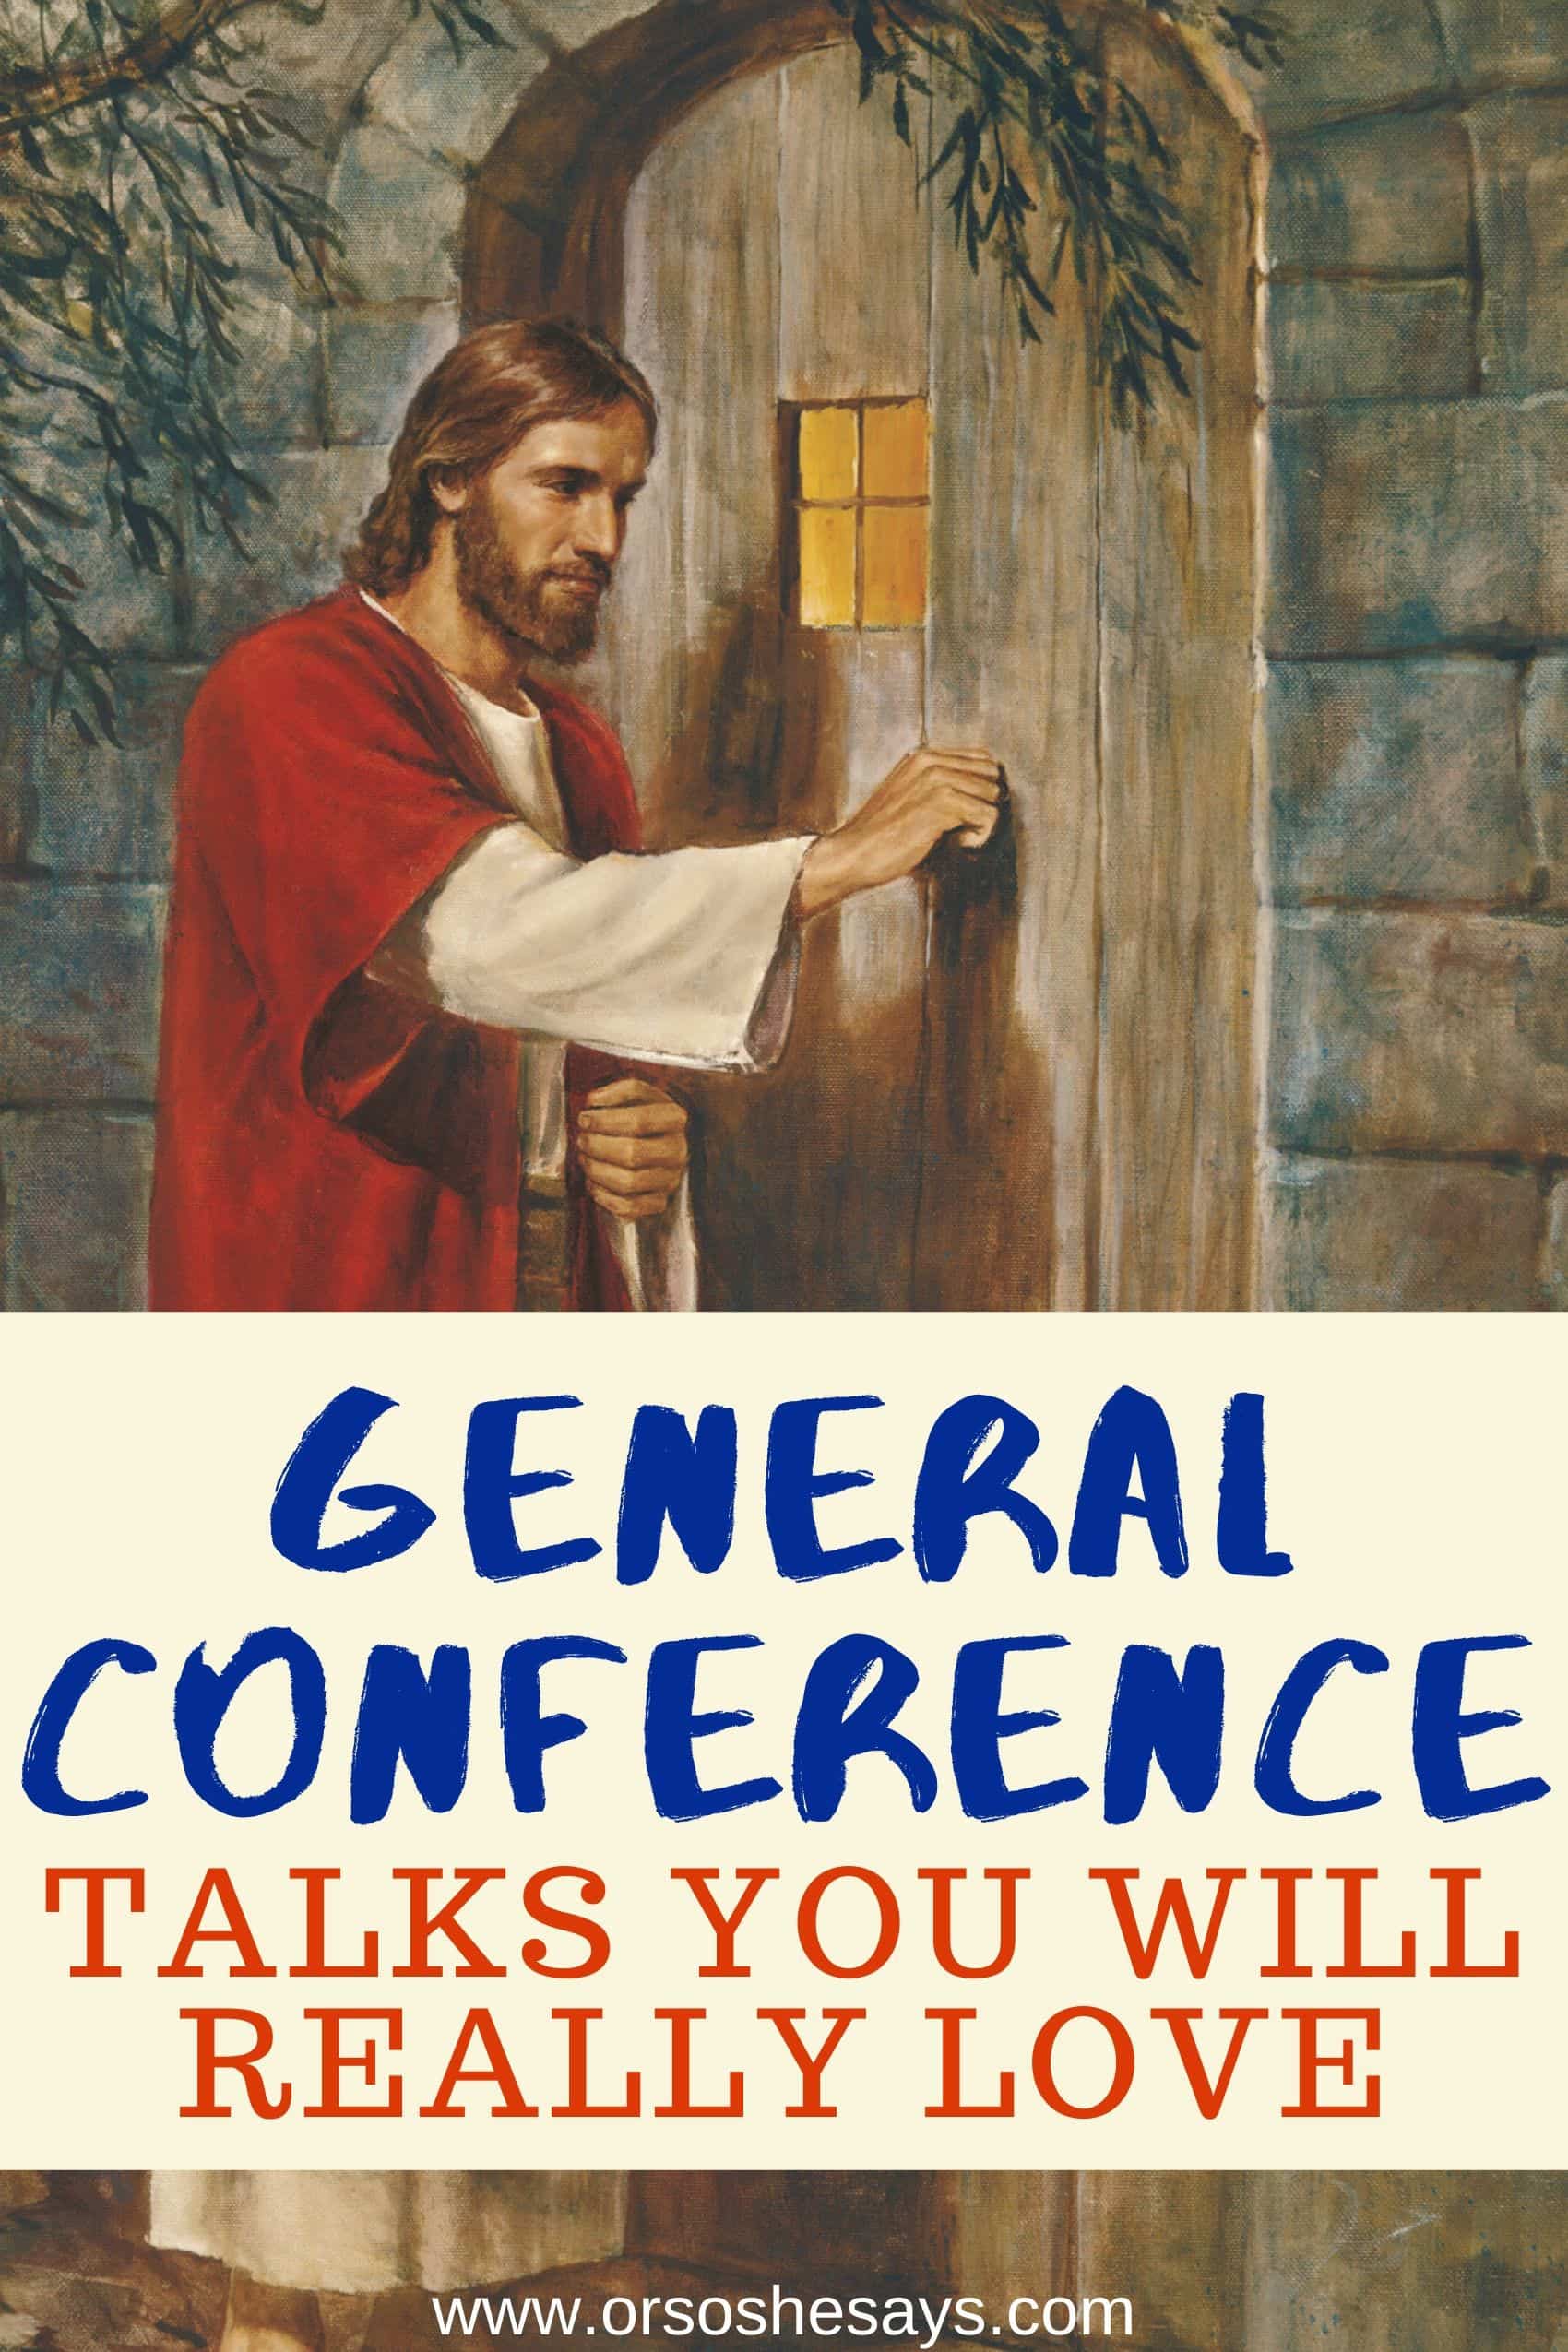 24 of the BEST General Conference Talks of All Time Voted by Readers!